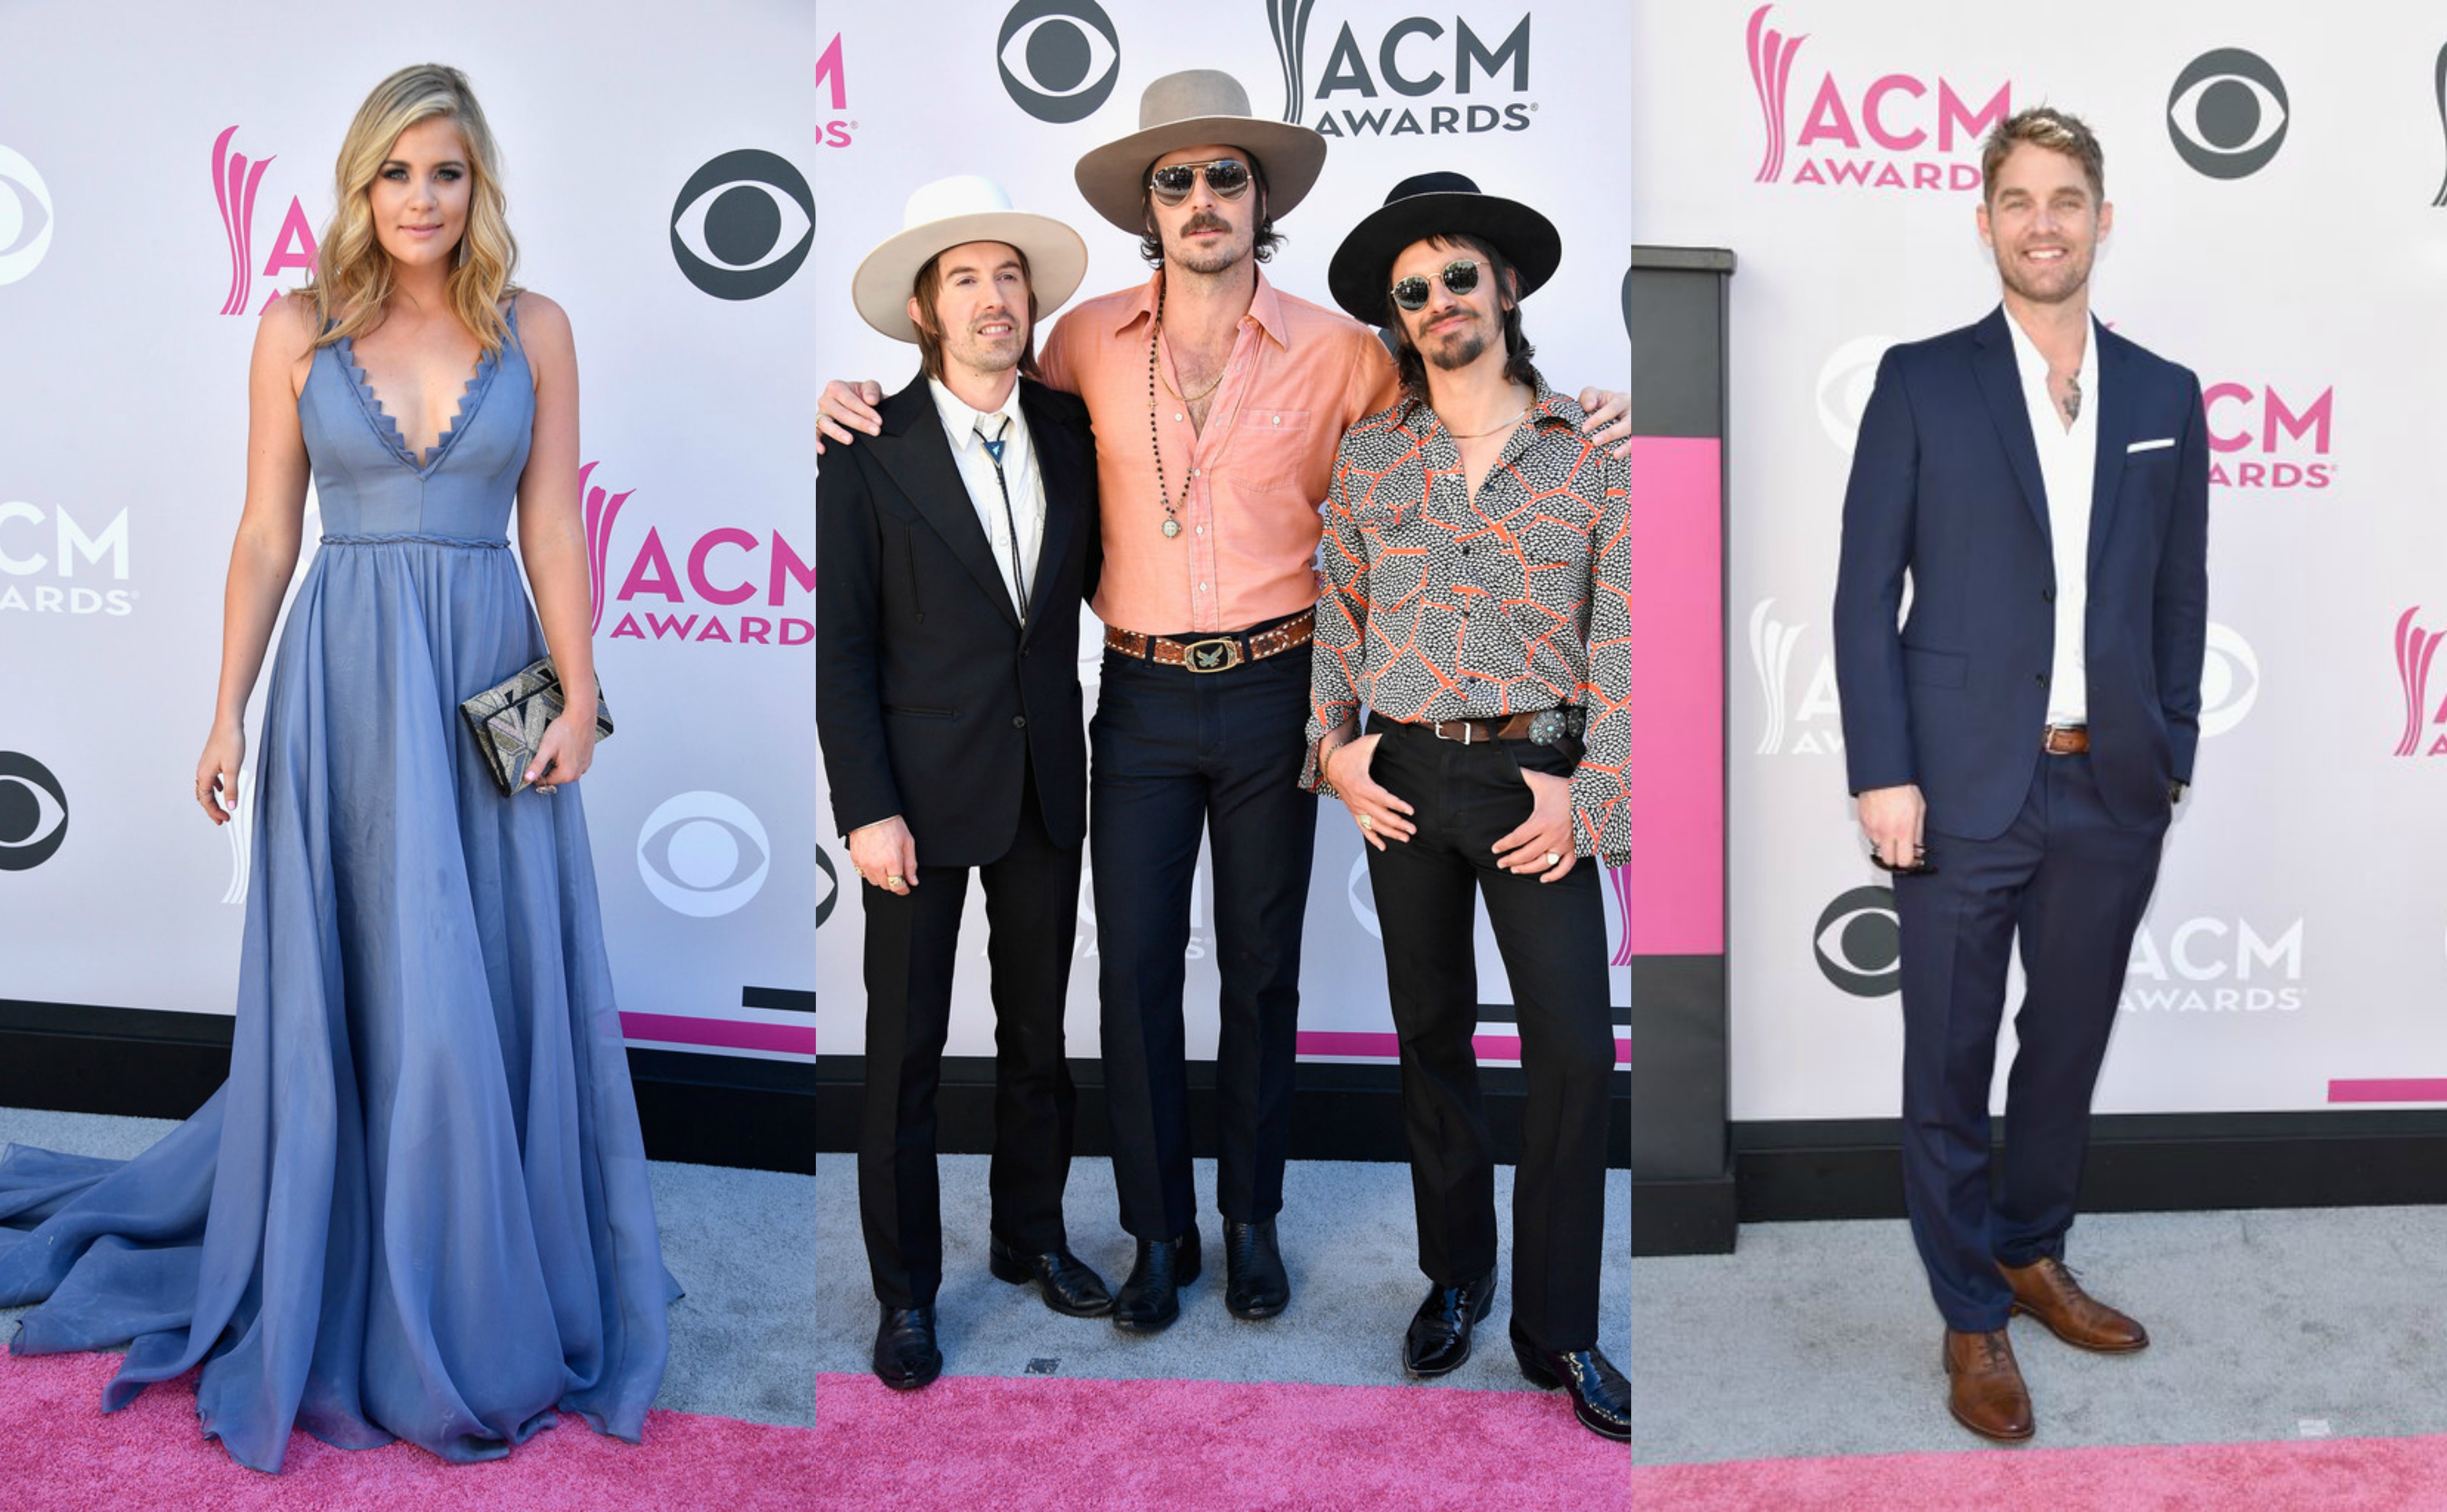 Everything You Need to Know About This Year’s ACM New Vocalists of the Year – Midland, Lauren Alaina, and Brett Young